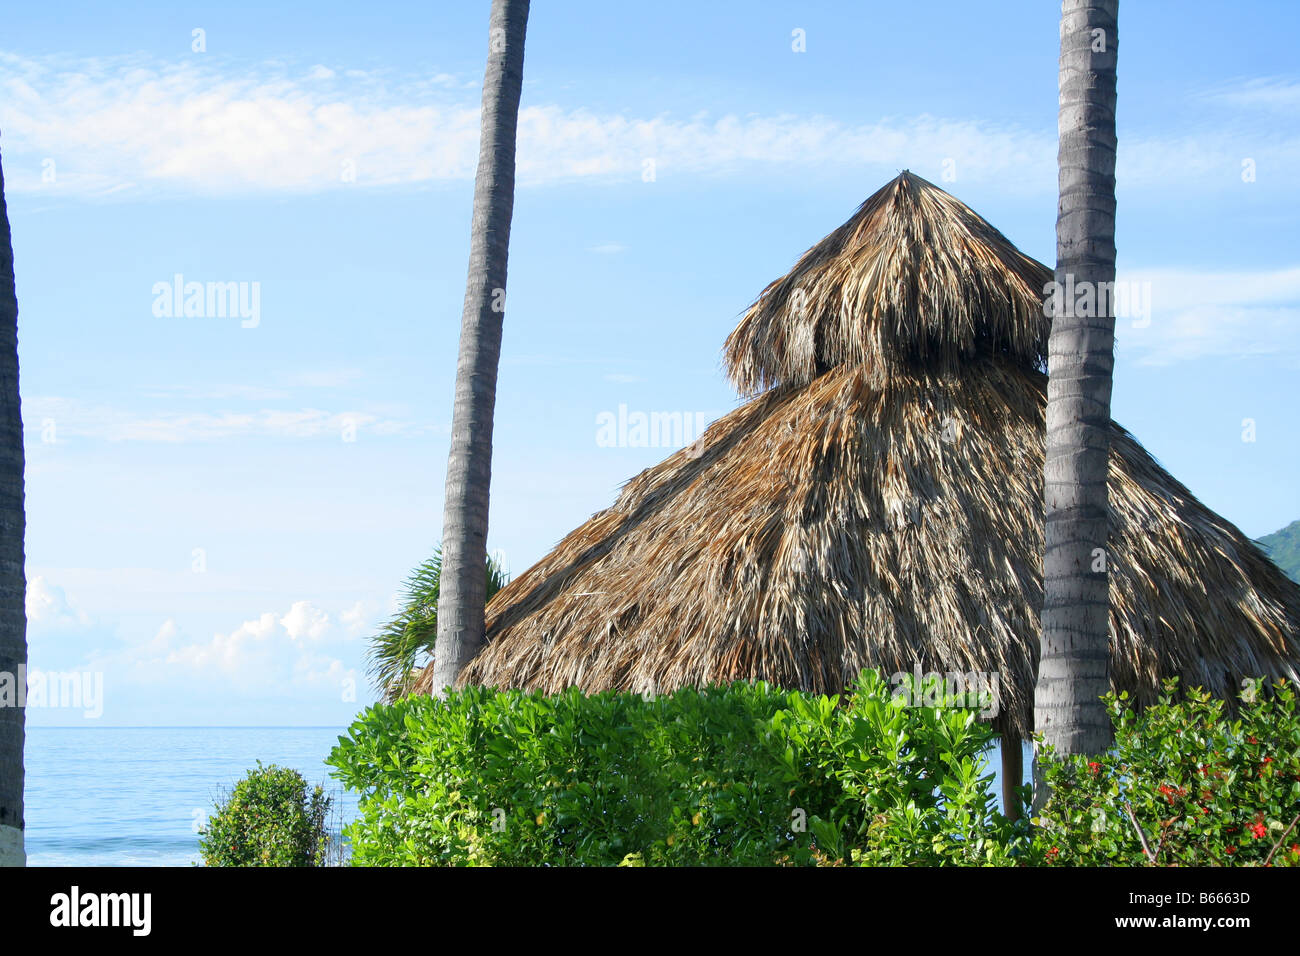 A thatched roof tropical grass hut or palapa in mexico Stock Photo